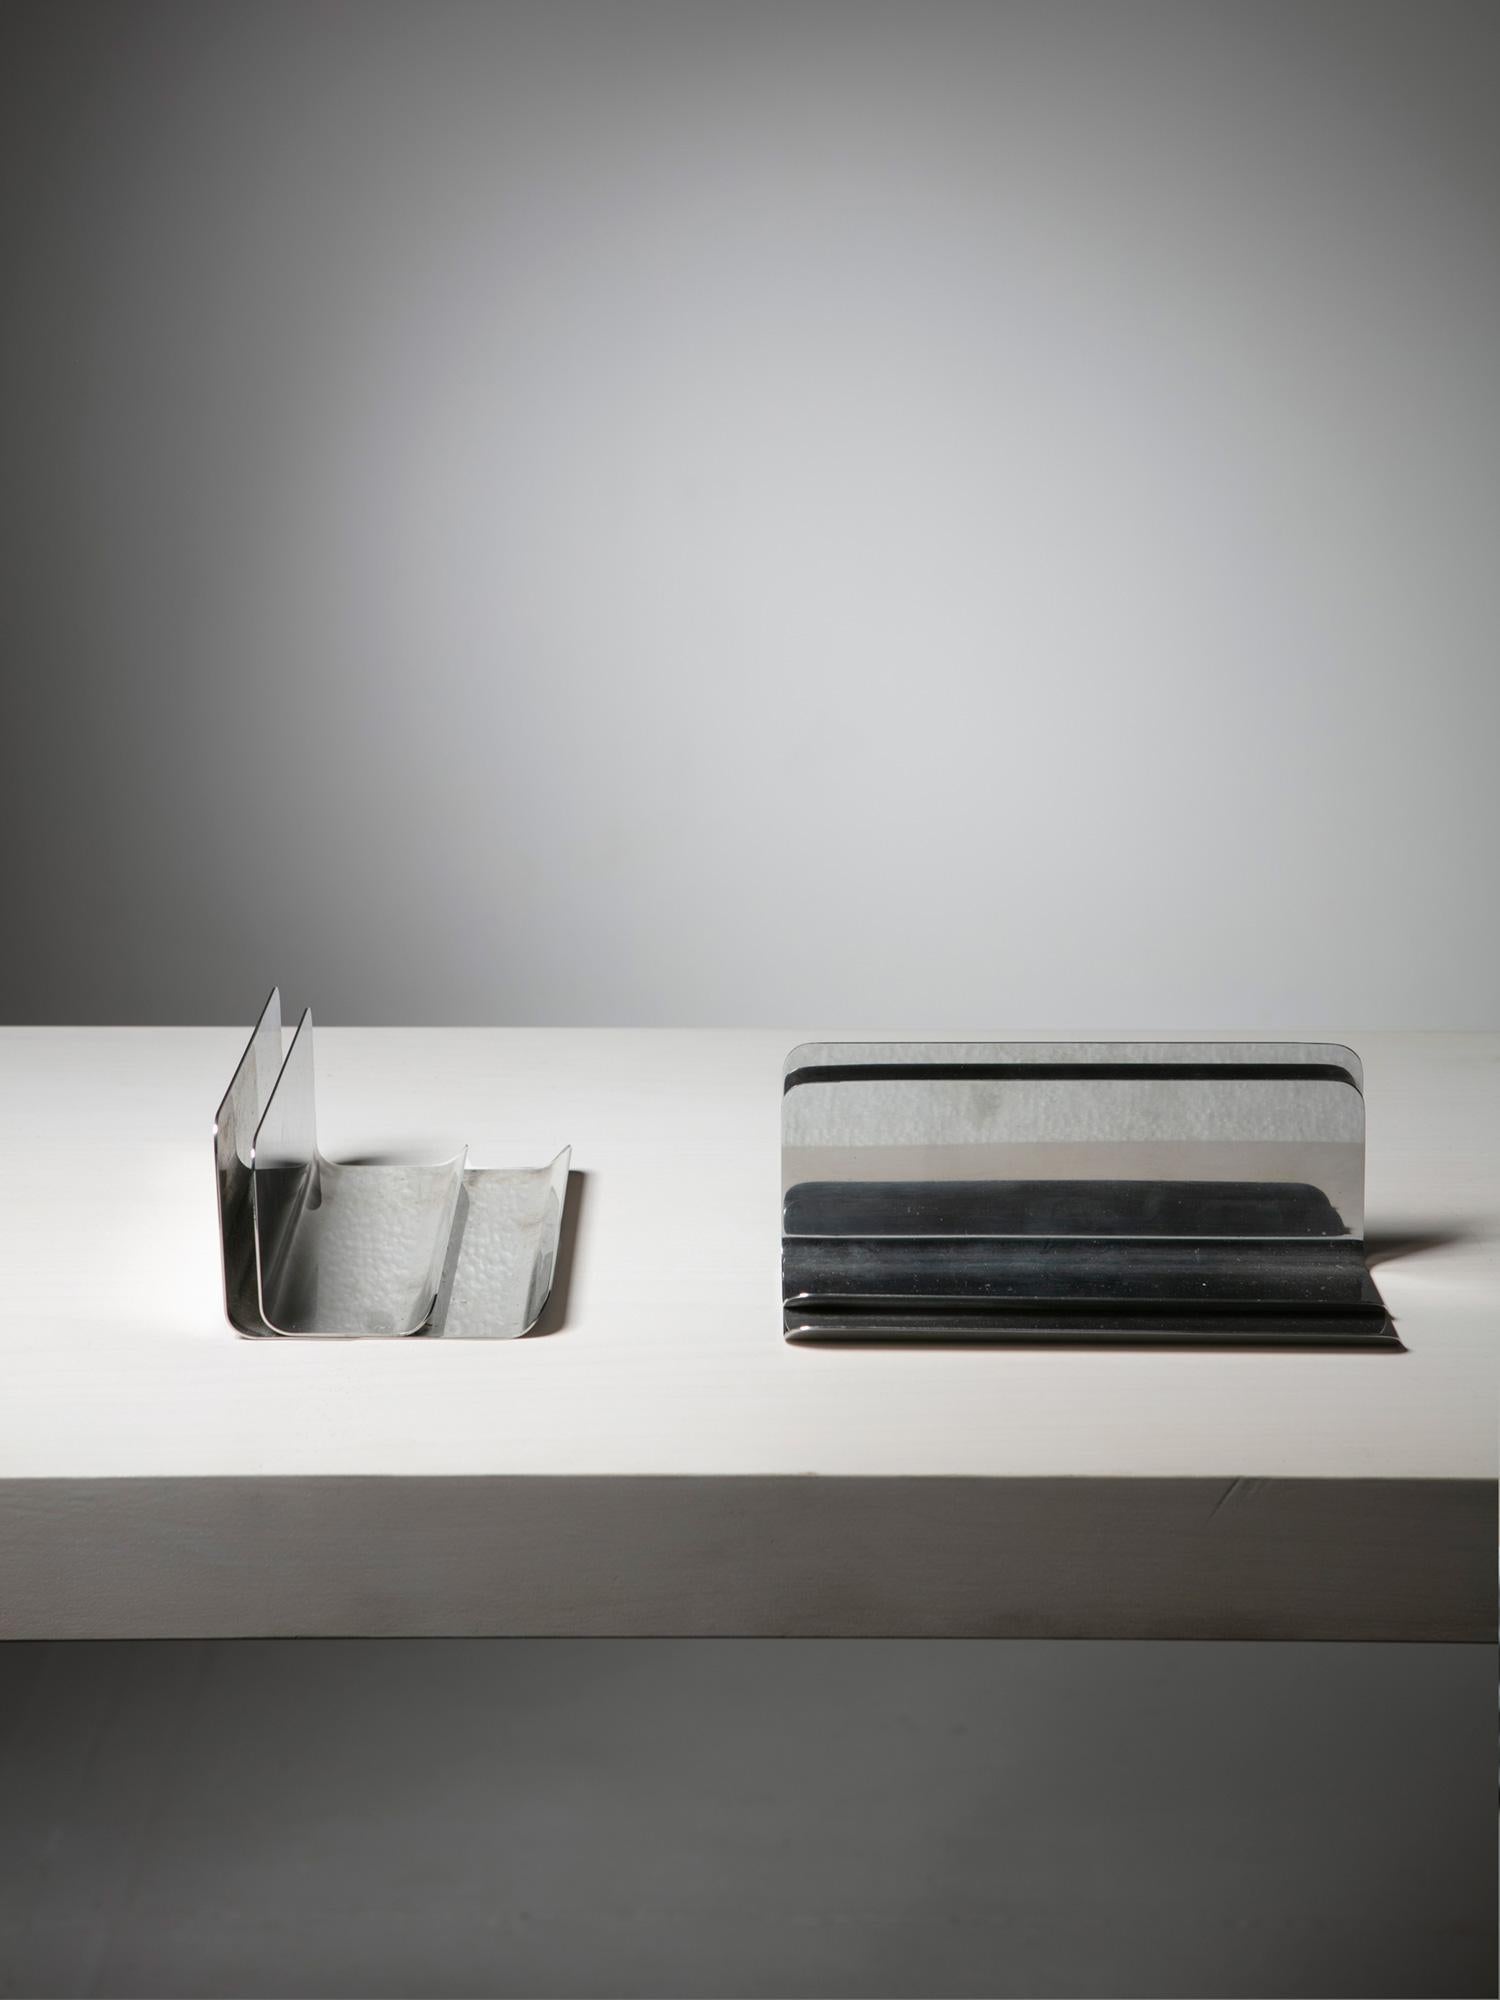 Set of two Ventotene desk sets by Enzo Mari for Danese.
Polished stainless steel elements featuring Vertical spaces to slip notepaper in, horizontal planes to put pencils on.
 